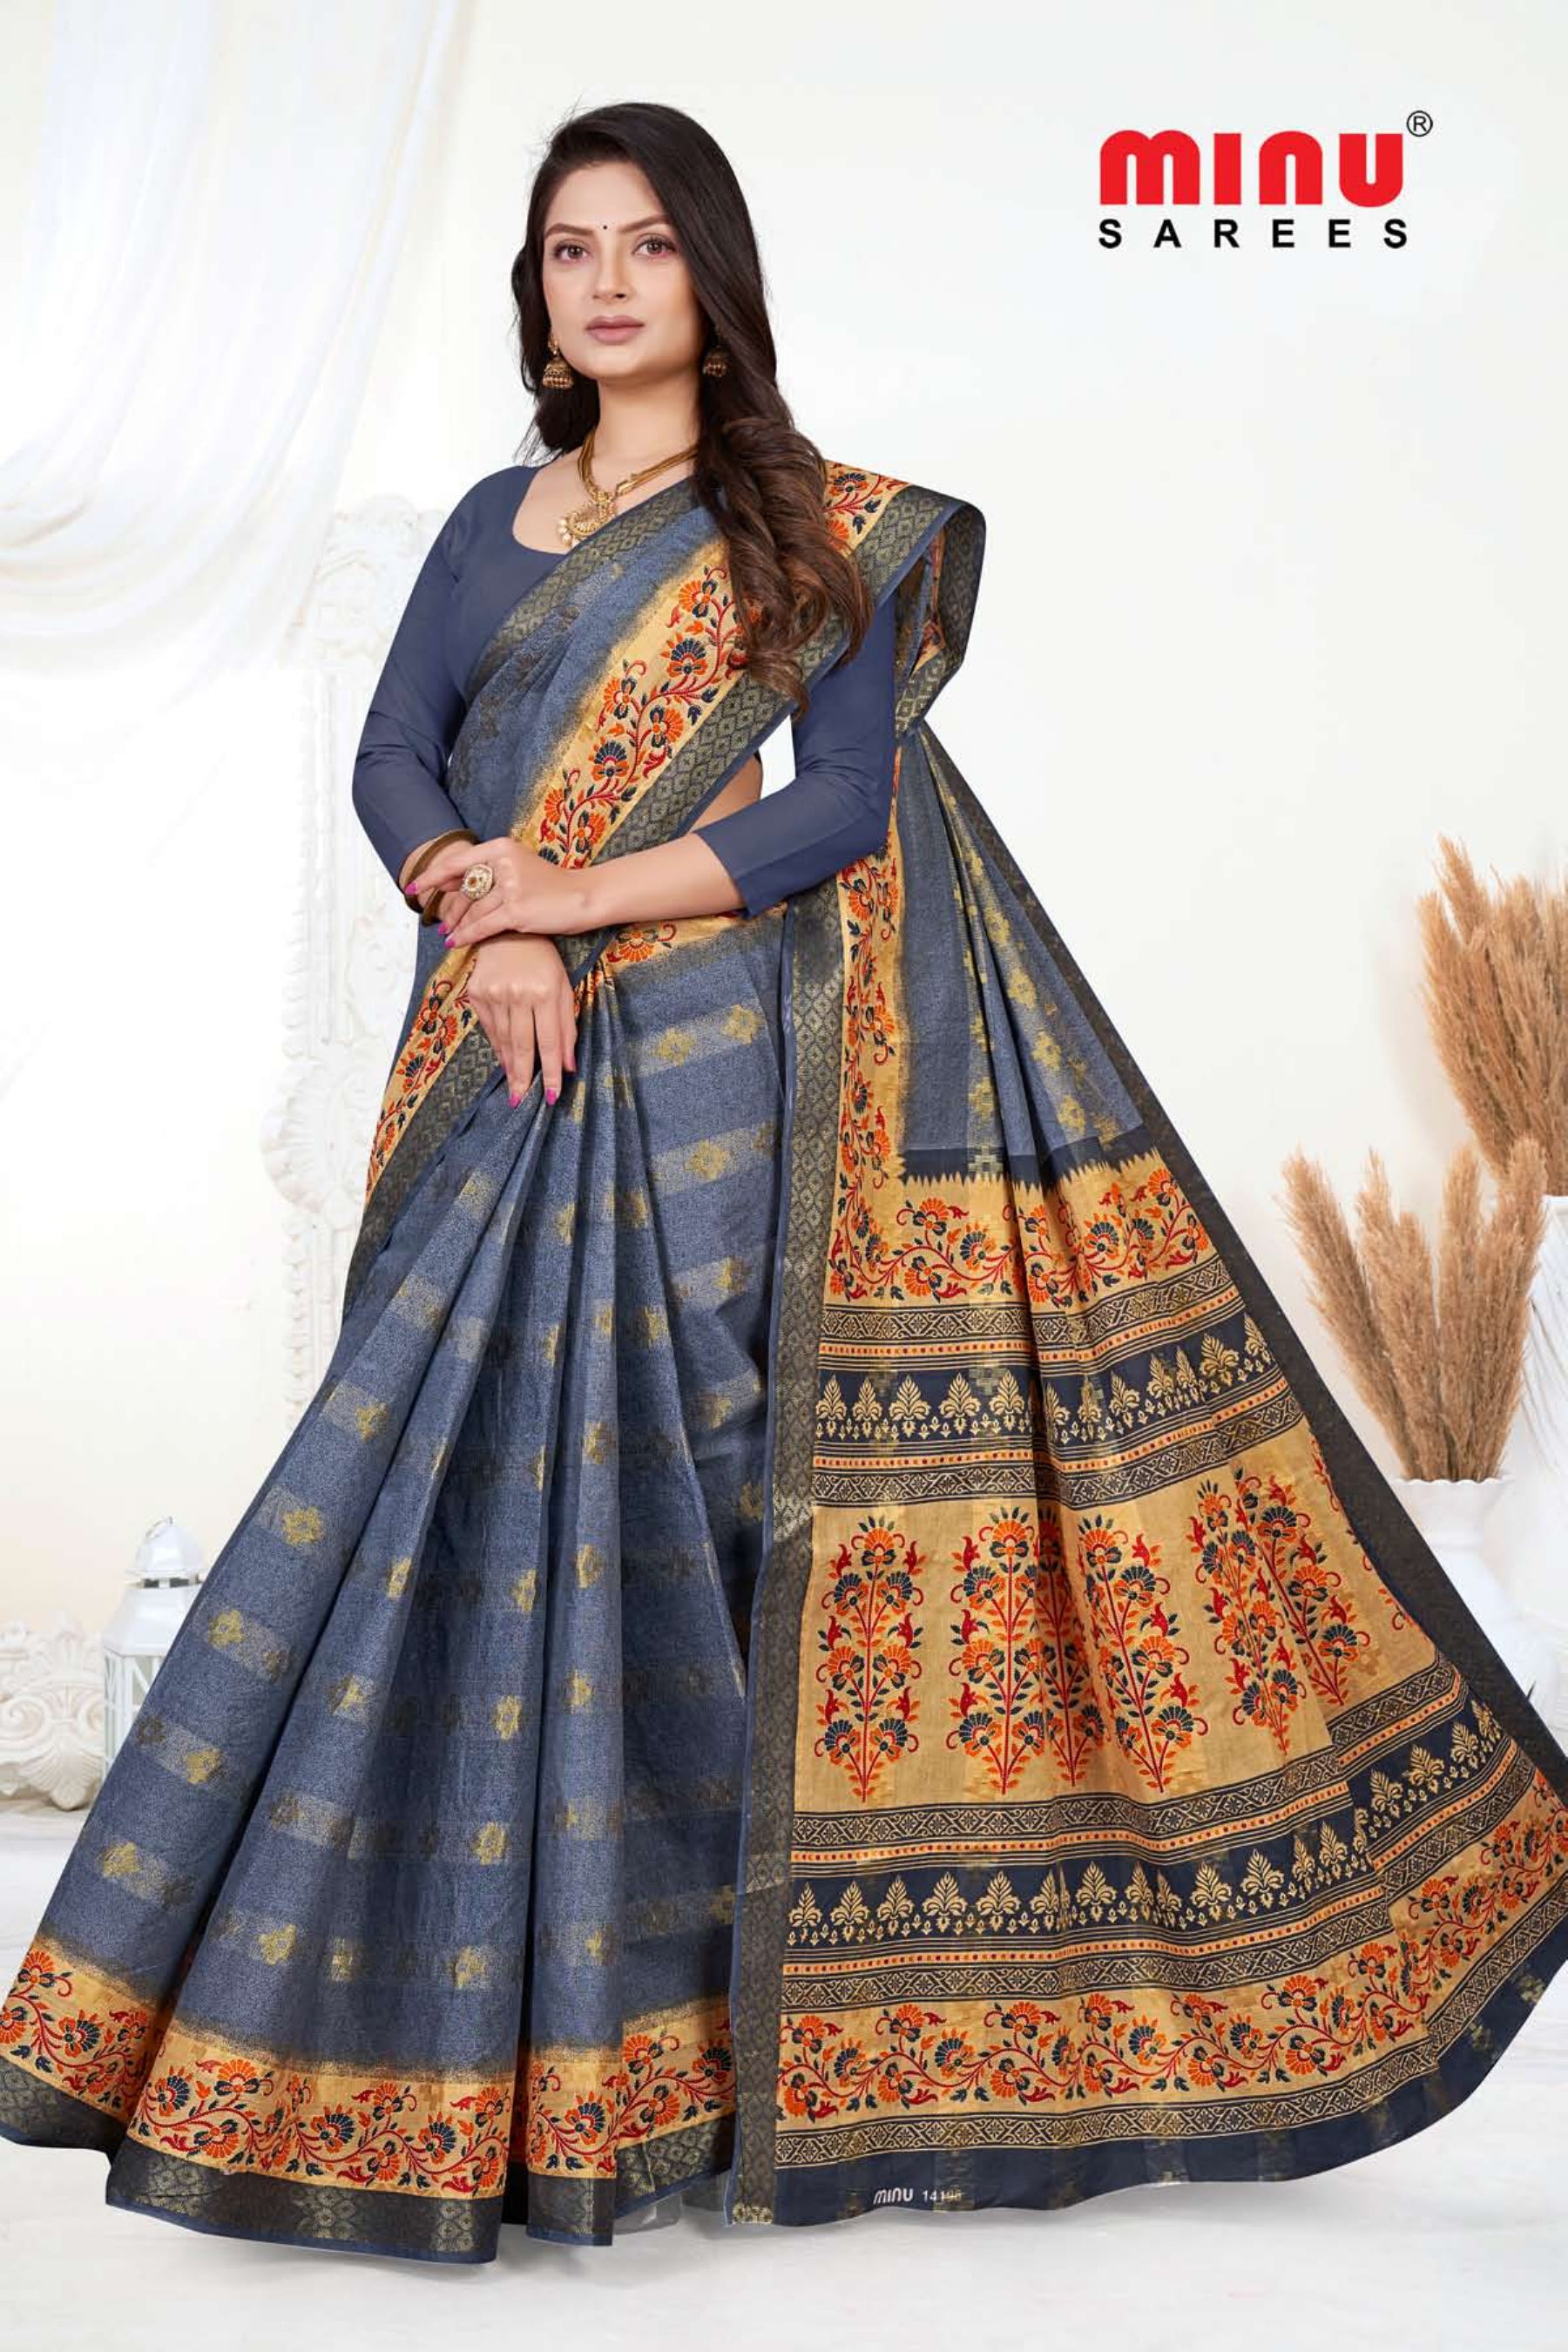 color printed saree with modern design